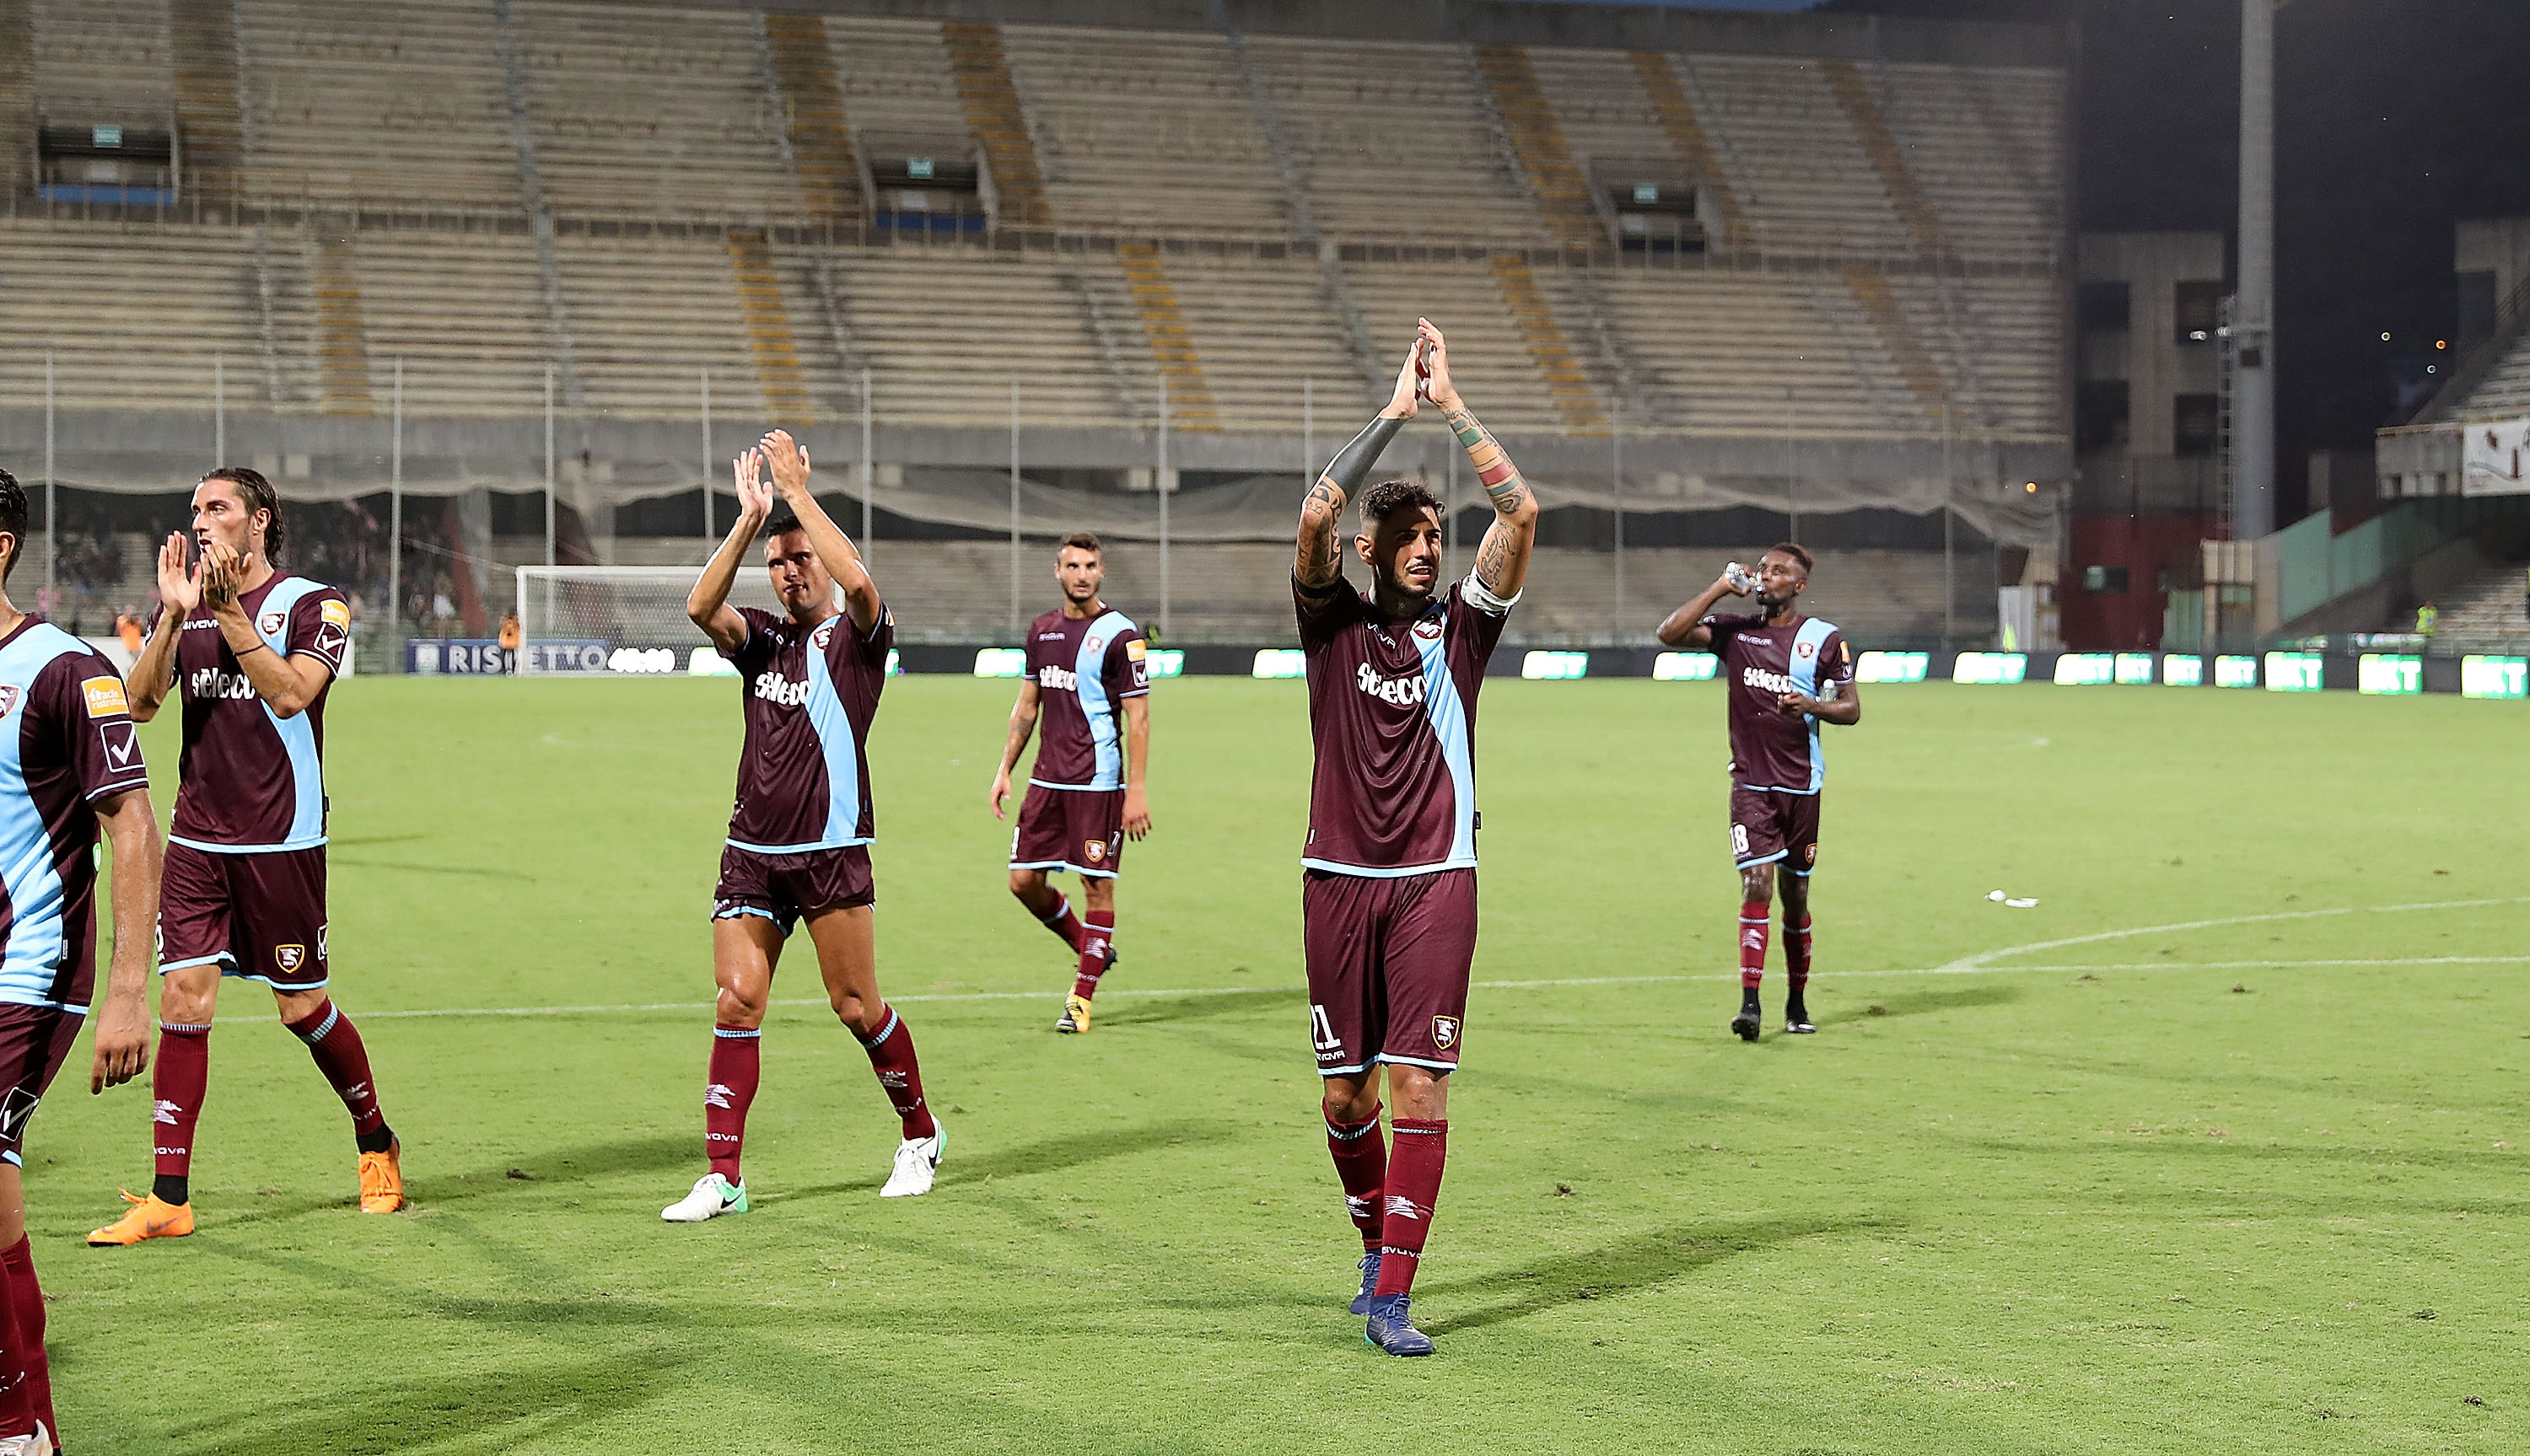 SALERNO, ITALY - AUGUST 25:  Players of US Salernitana greets the supporters after the Serie B match between US Salernitana and US Citta di Palermo on August 25, 2018 in Salerno, Italy.  (Photo by Francesco Pecoraro/Getty Images)